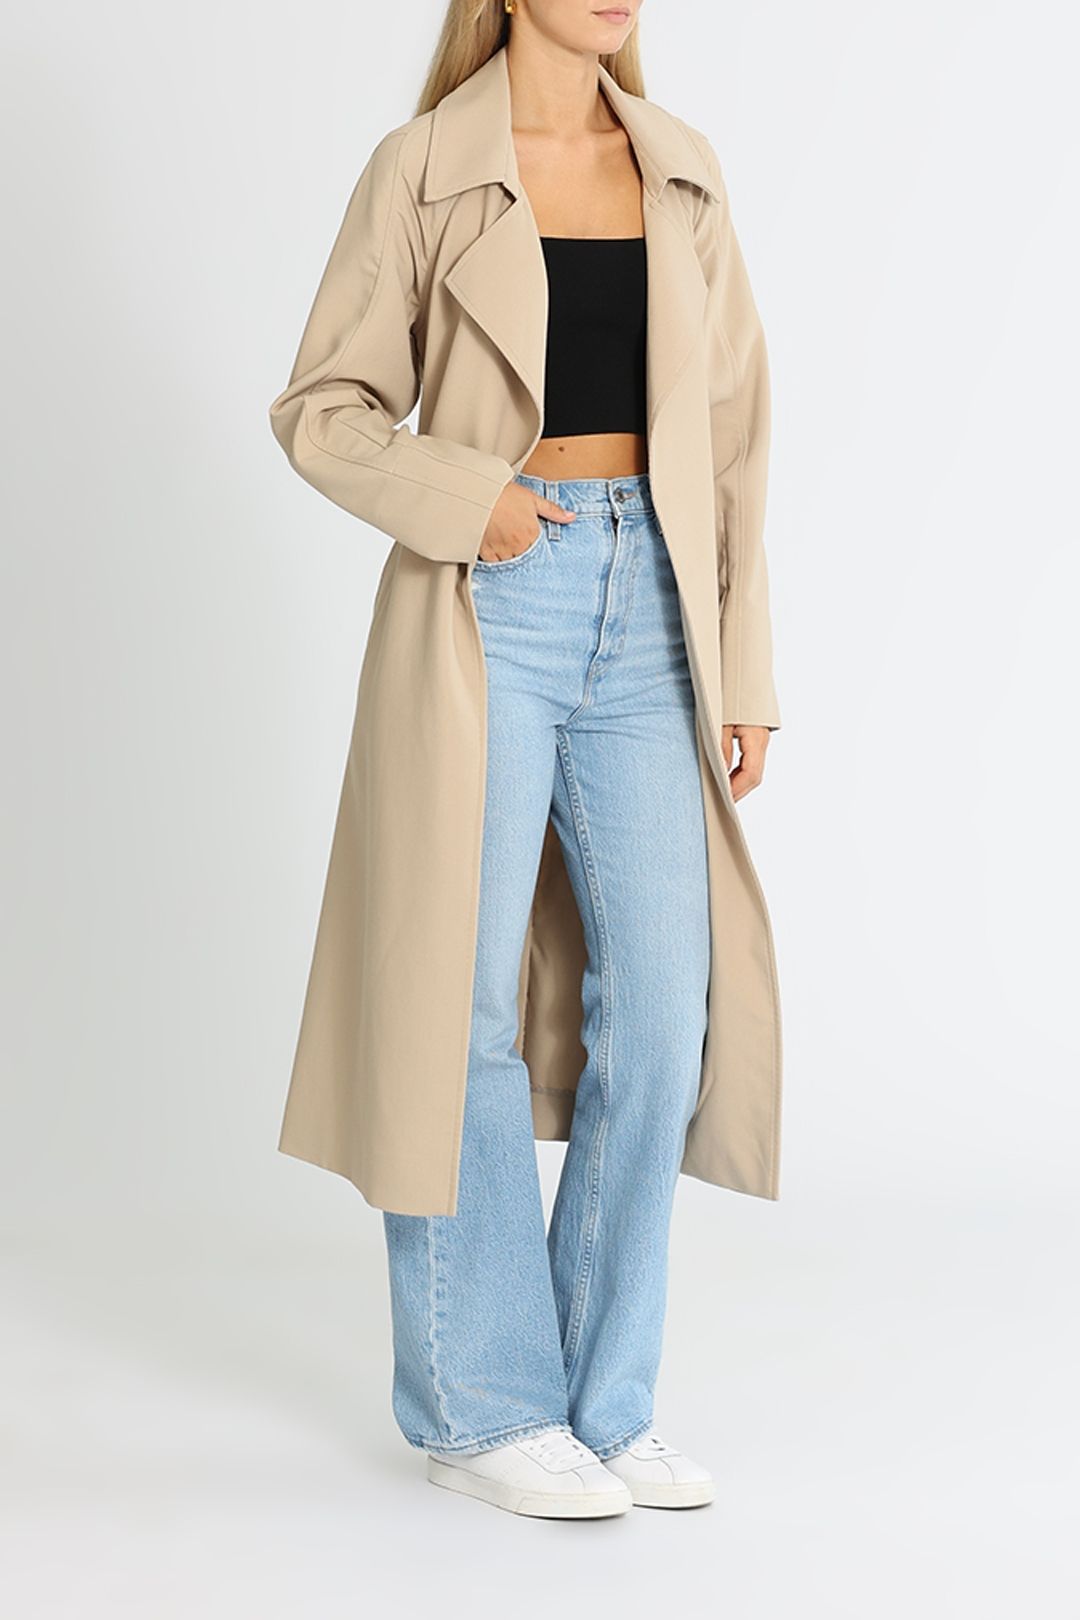 Elka Collective Solar Trench Beige Long